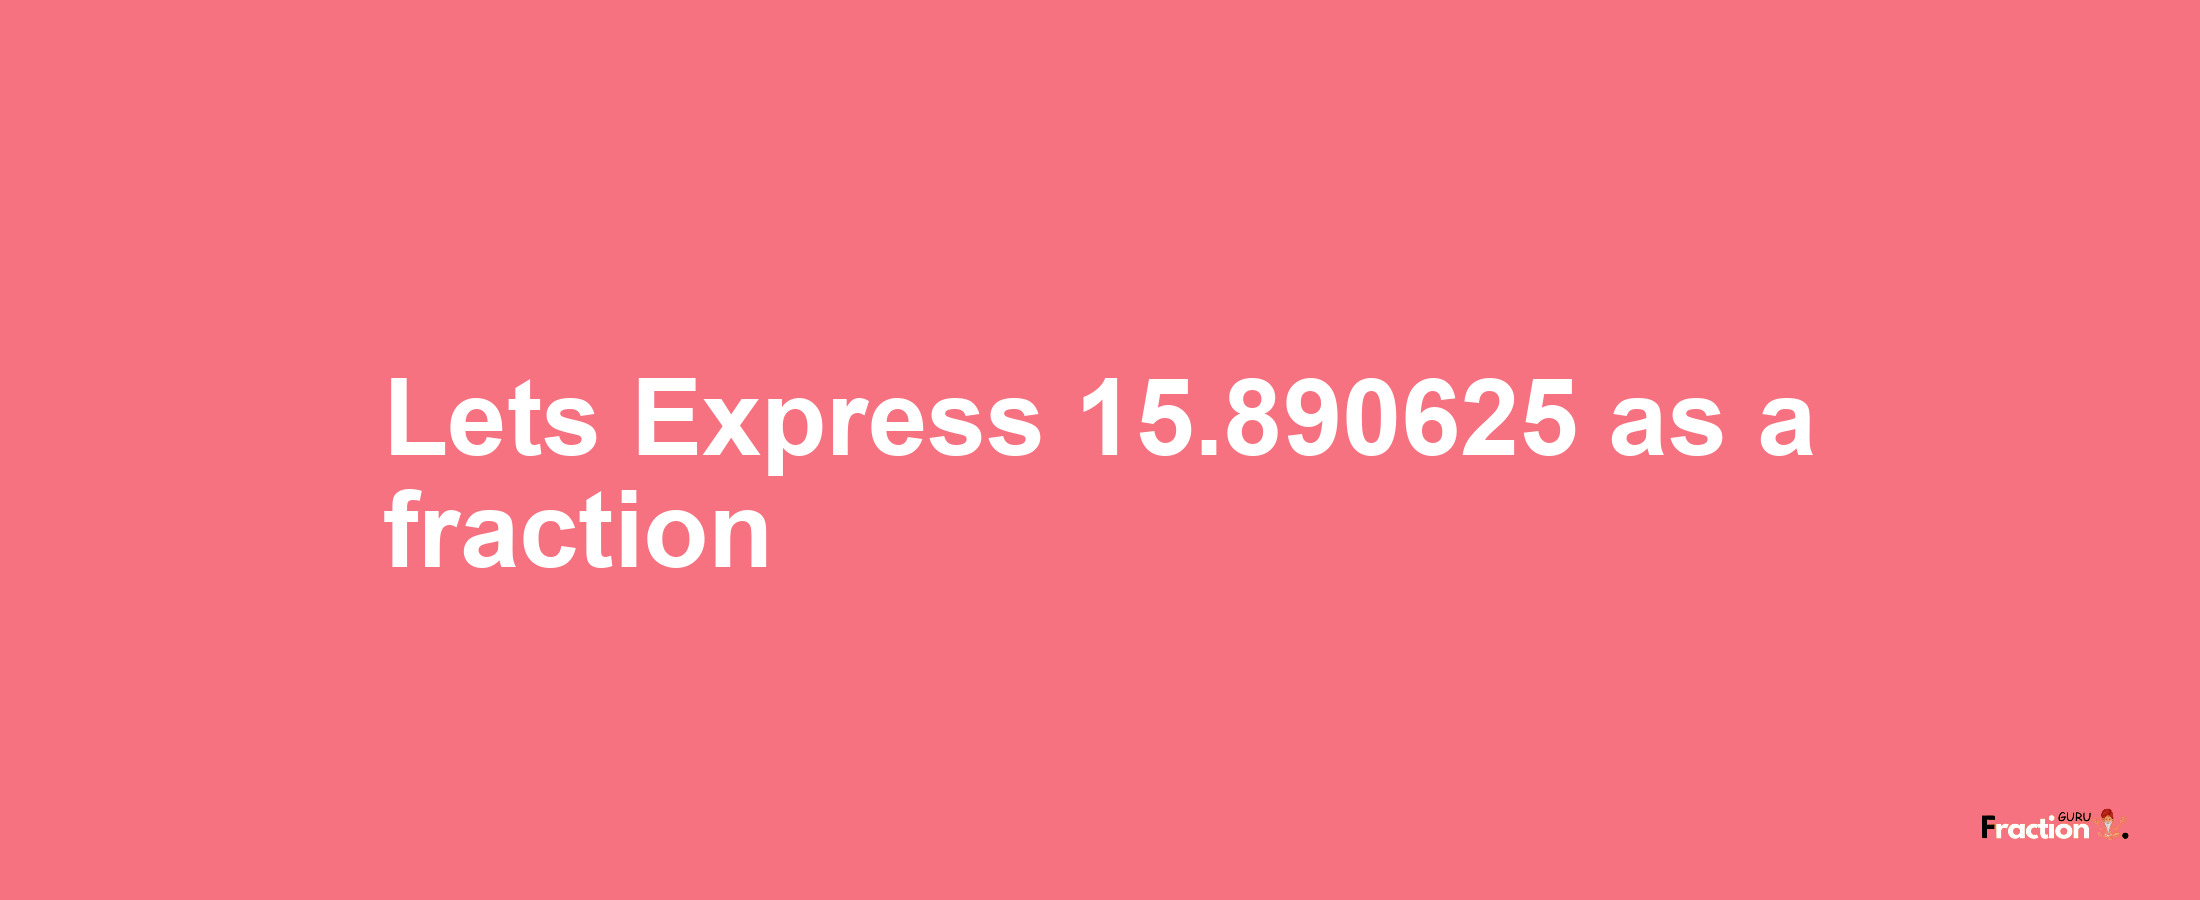 Lets Express 15.890625 as afraction